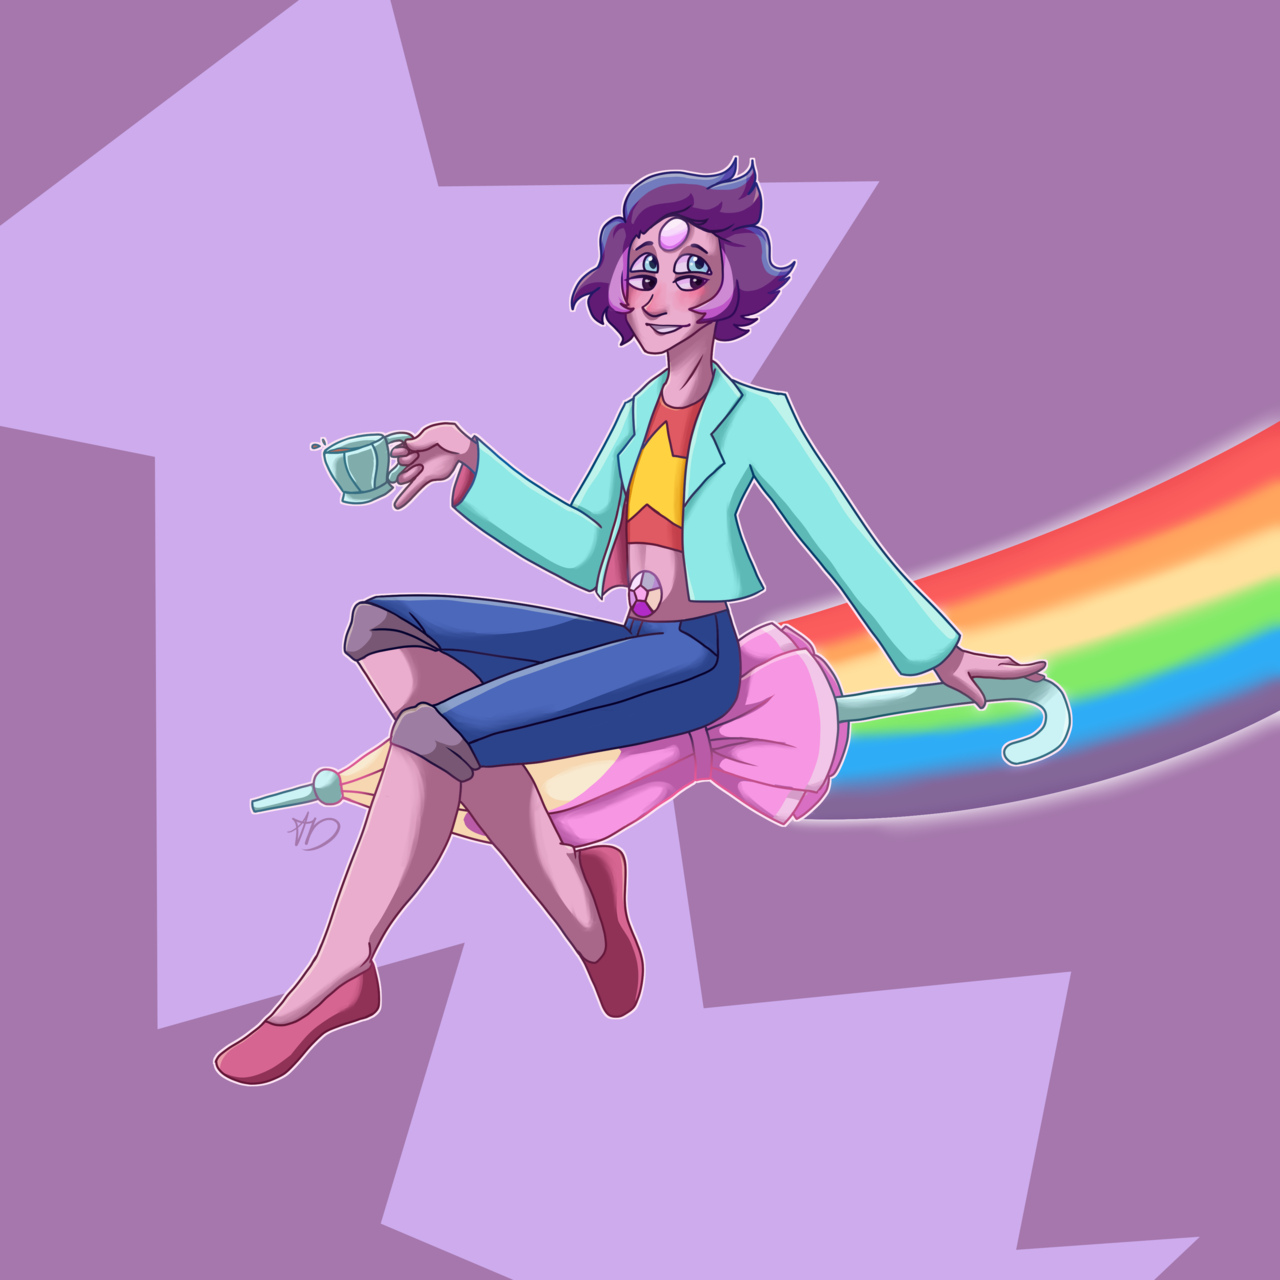 Y'all know I couldn't help myself! Here's another Rainbow Quartz 2.0.